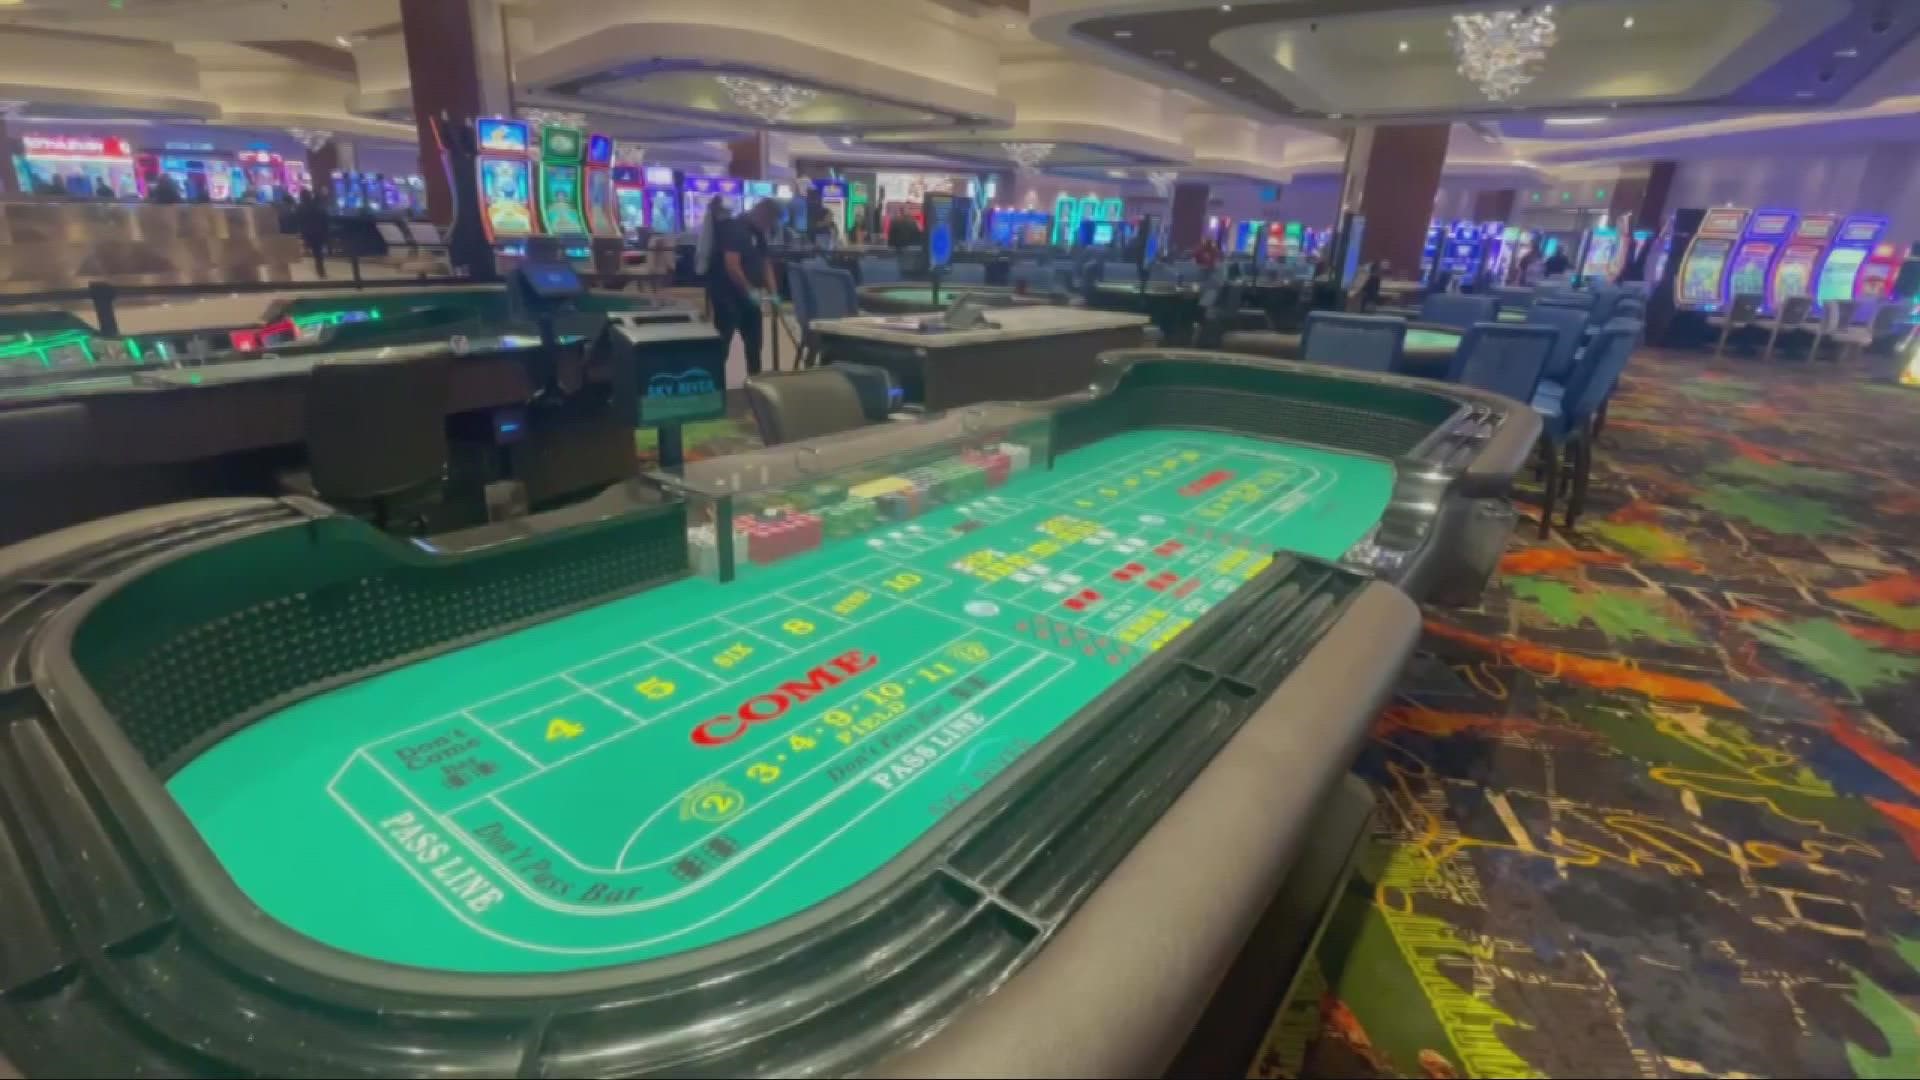 The Sky River Casino in Elk Grove said they were going to open in about a month but surprised customers on social media by posting they were open around midnight.